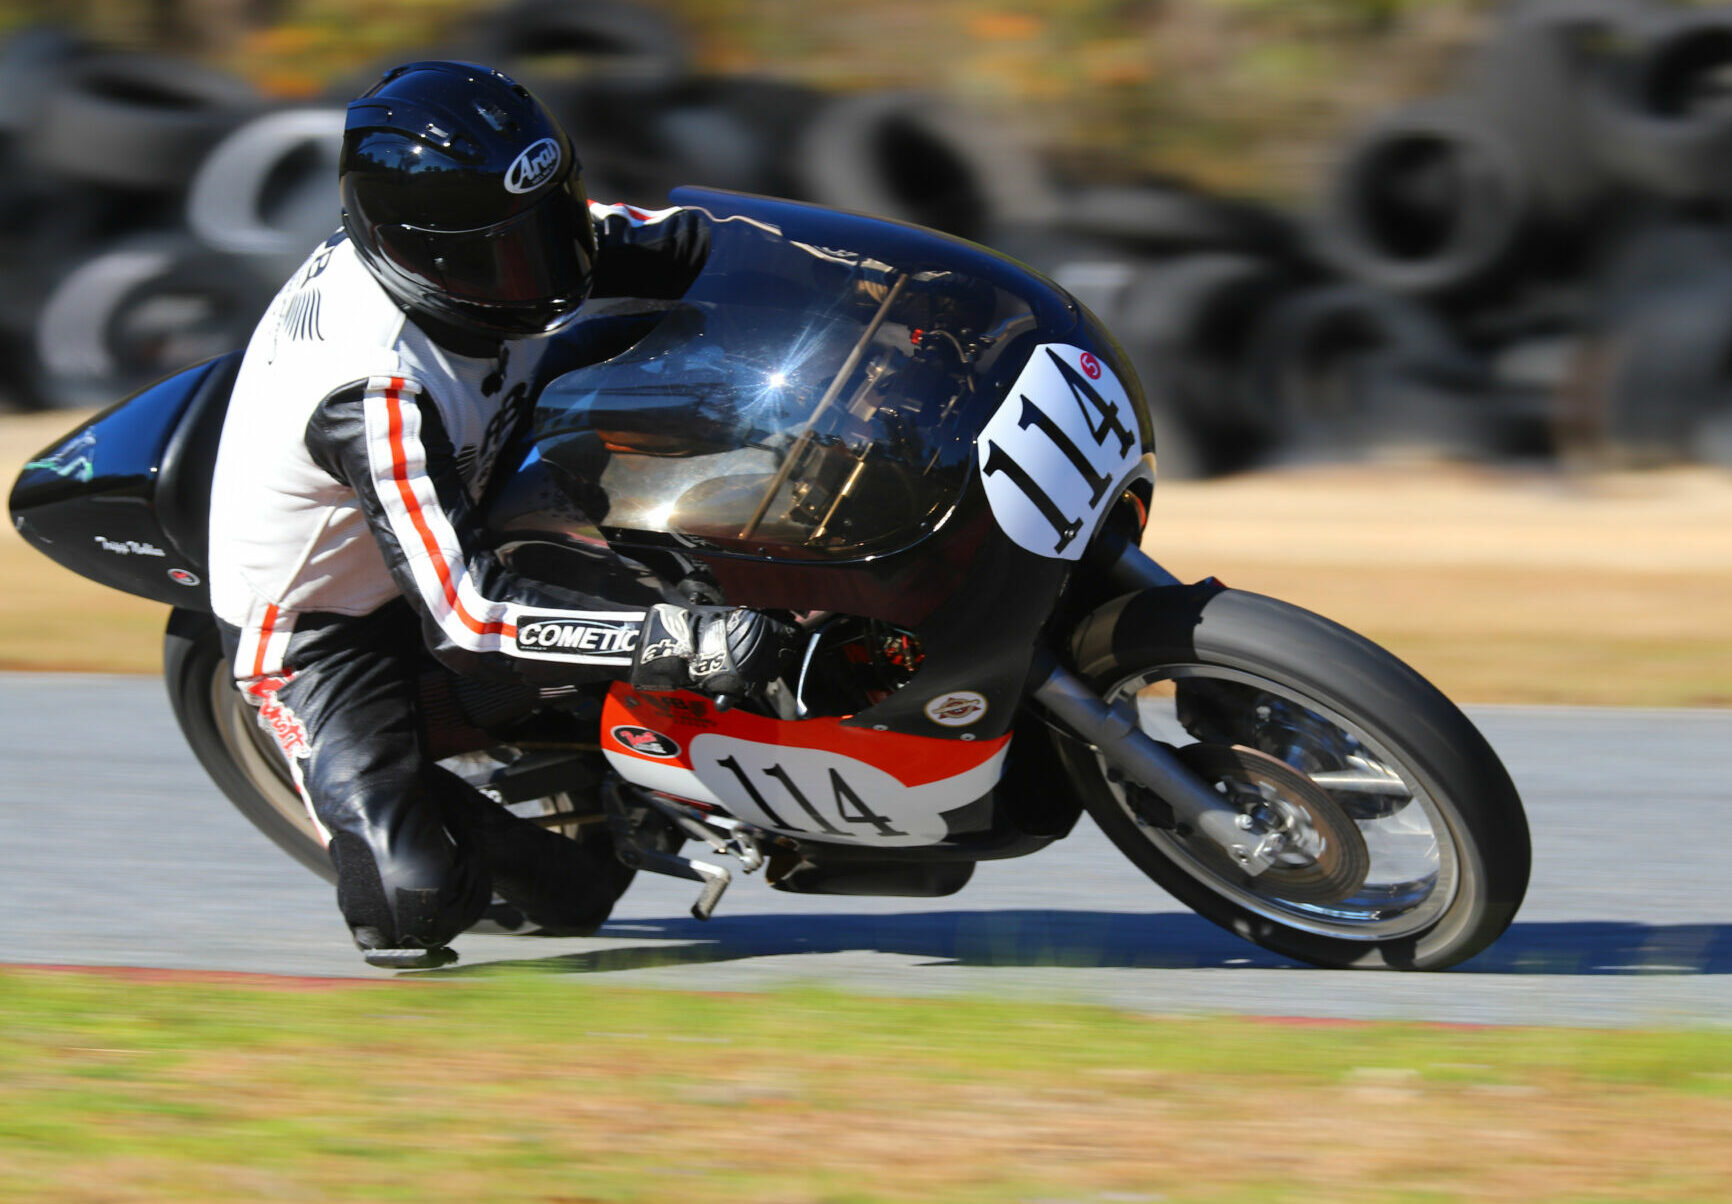 Tripp Nobles (114) won a Formula 750 race during the AHRMA event at Roebling Road Raceway. Photo by etechphoto.com, courtesy AHRMA.